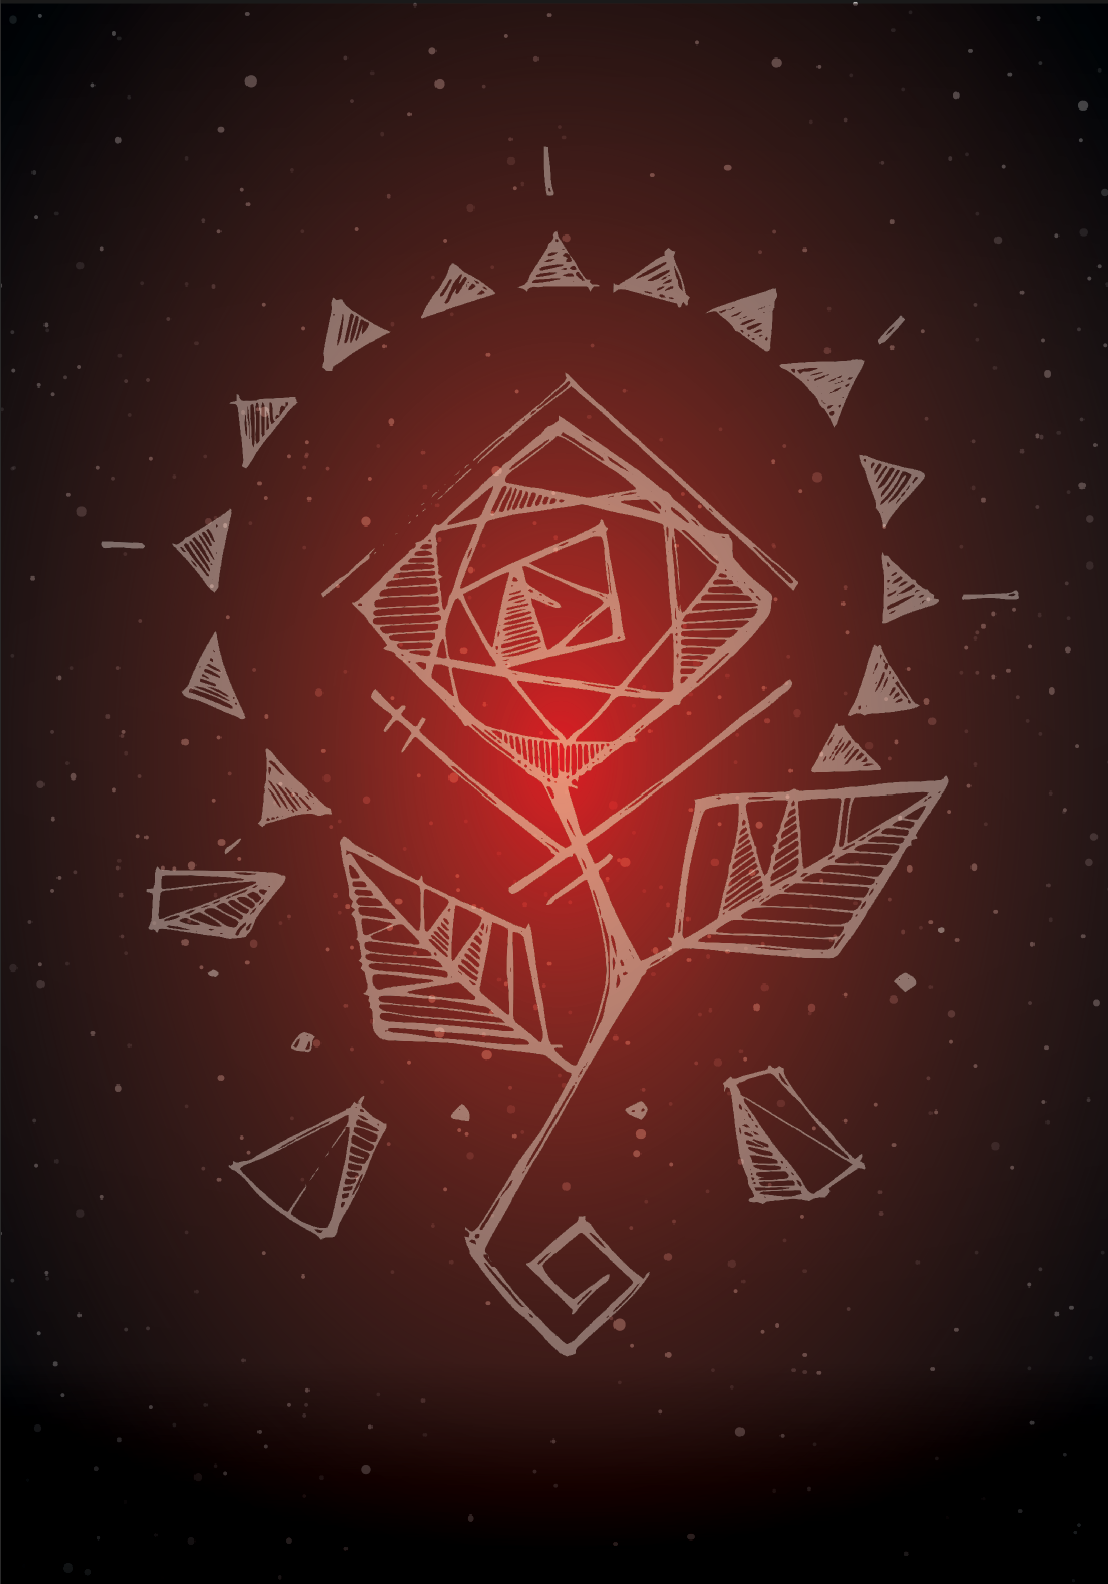 angular rose sketch circled by triangles